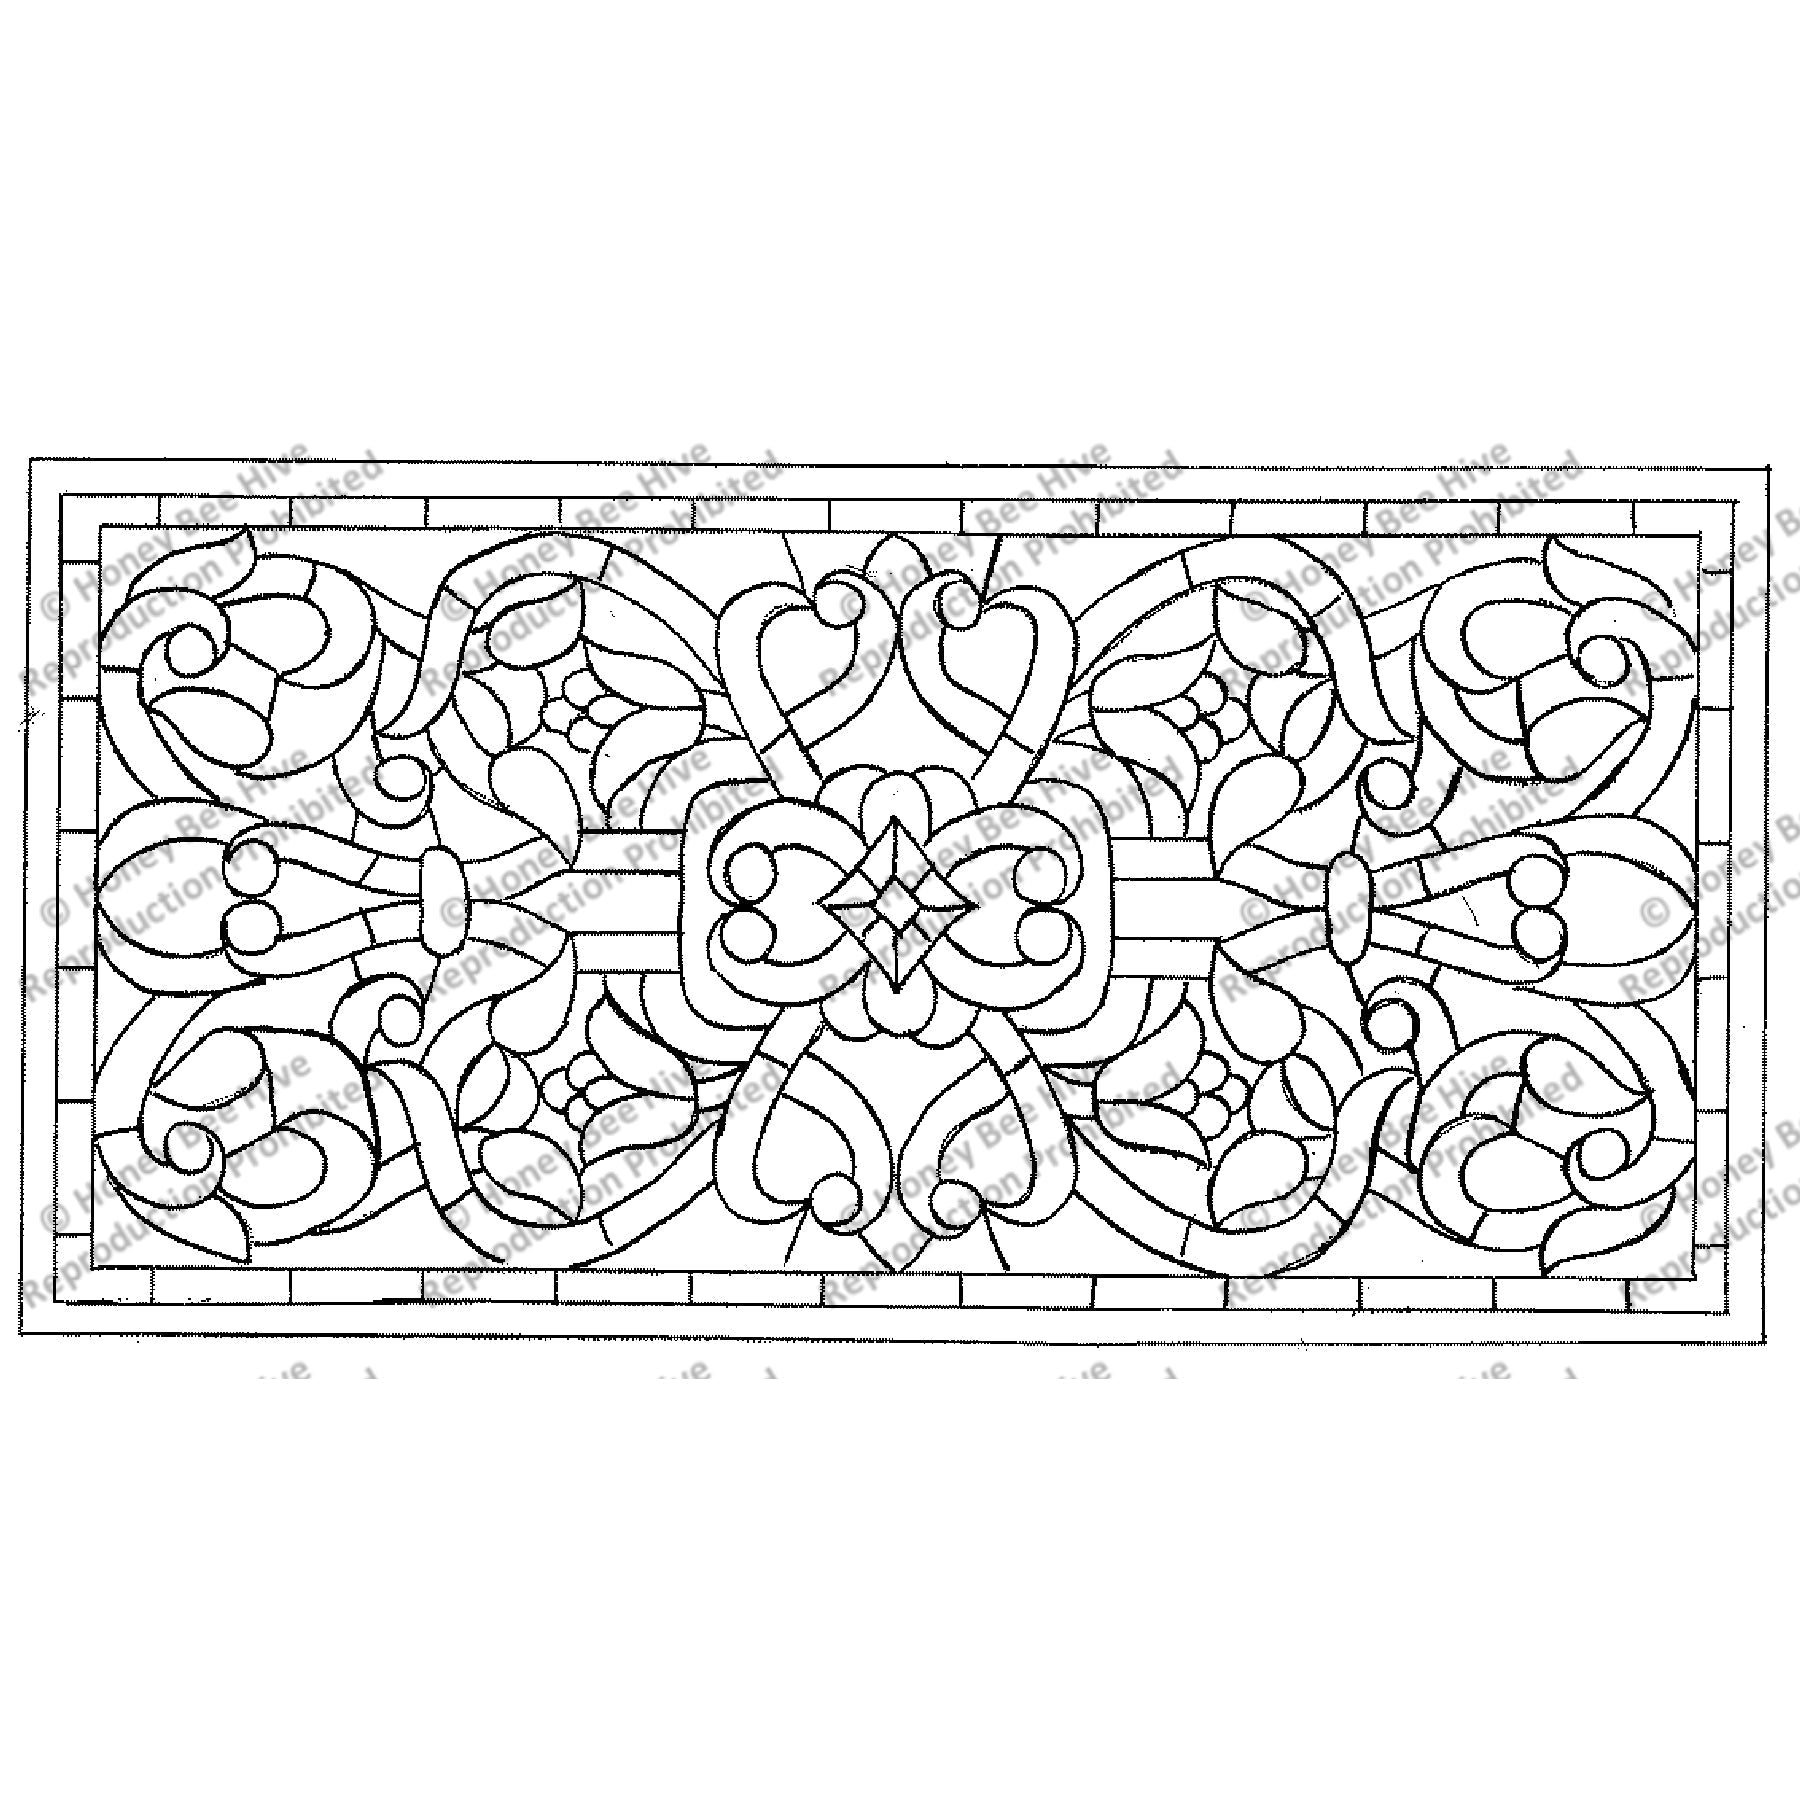 Stained Glass Bench, rug hooking pattern